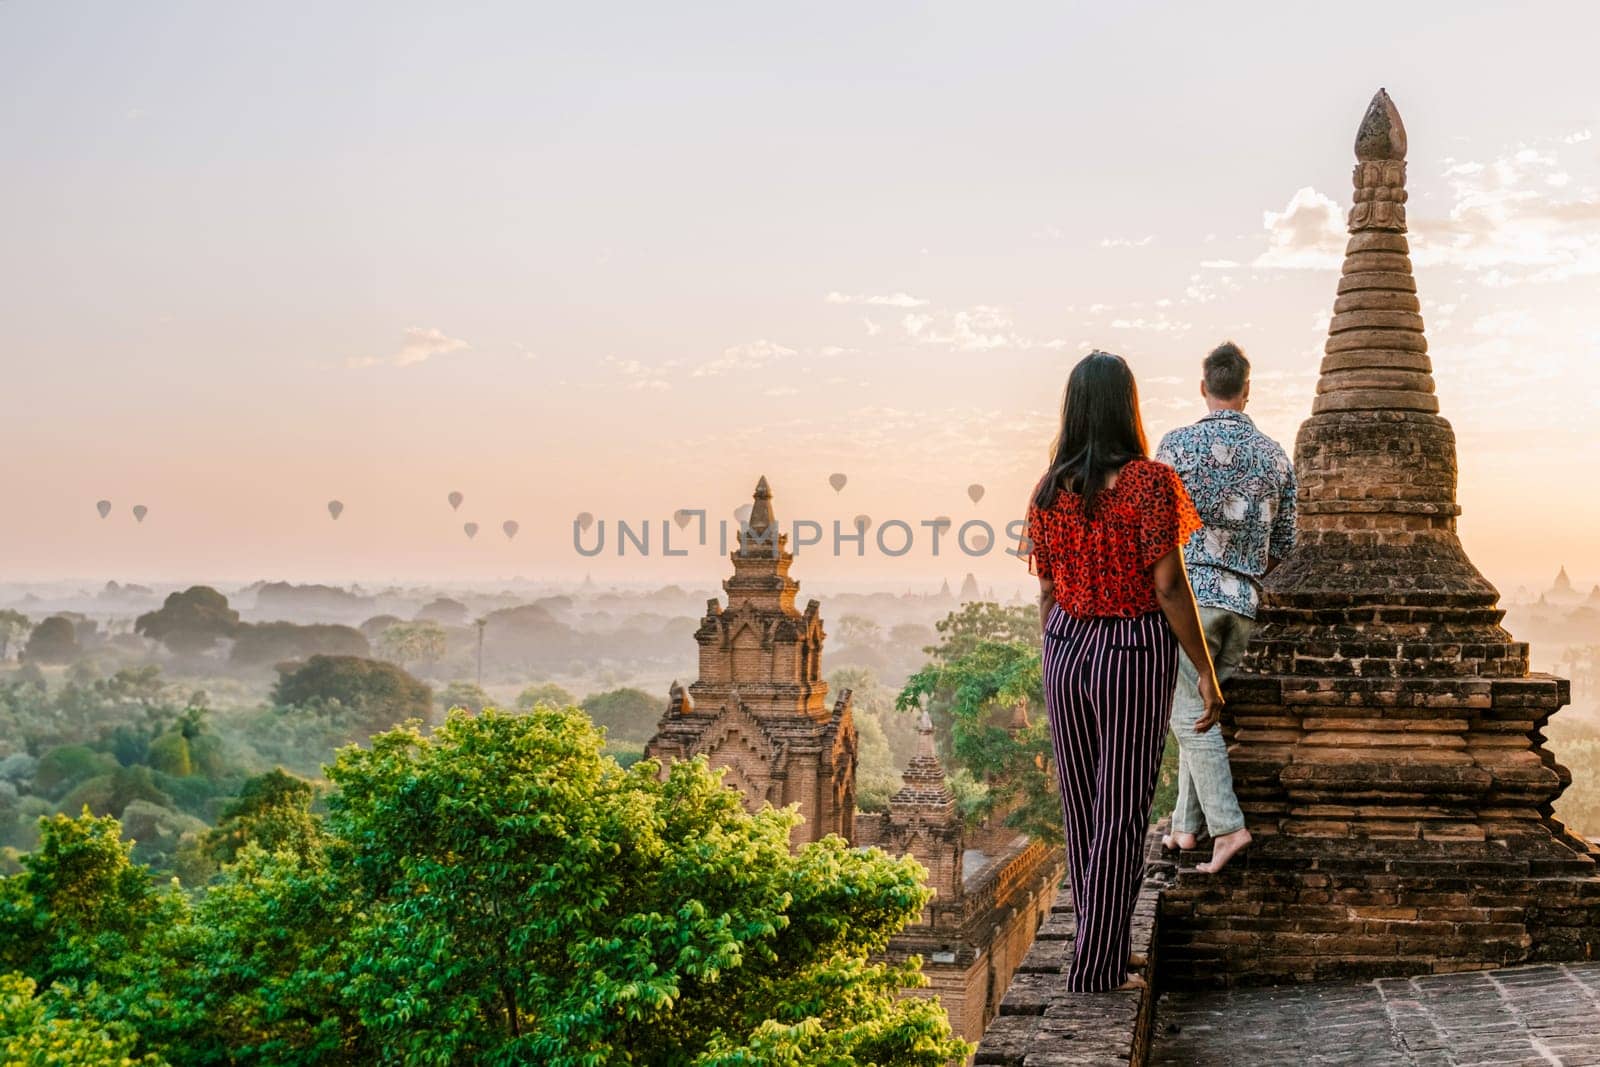 Bagan Myanmar, a couple of men and women are looking at the sunrise on top of an old pagoda temple. a couple watching sunrise with hot air balloons in the sky in Myanmar Asia Bagan